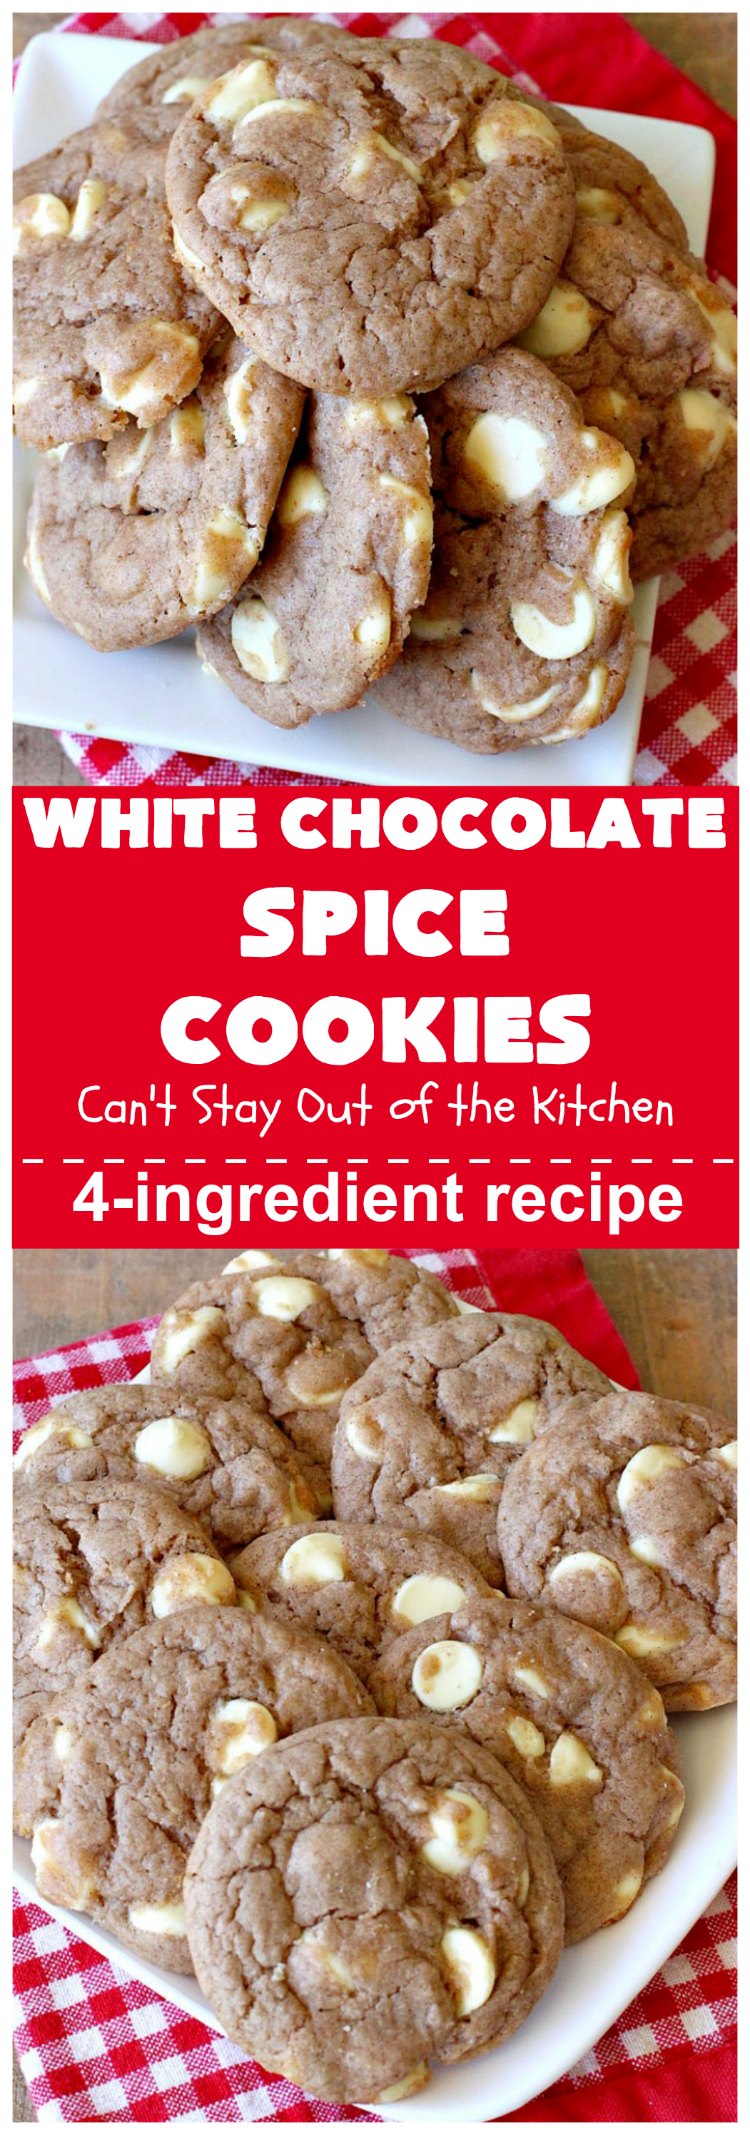 White Chocolate Spice Cookies | Can't Stay Out of the Kitchen